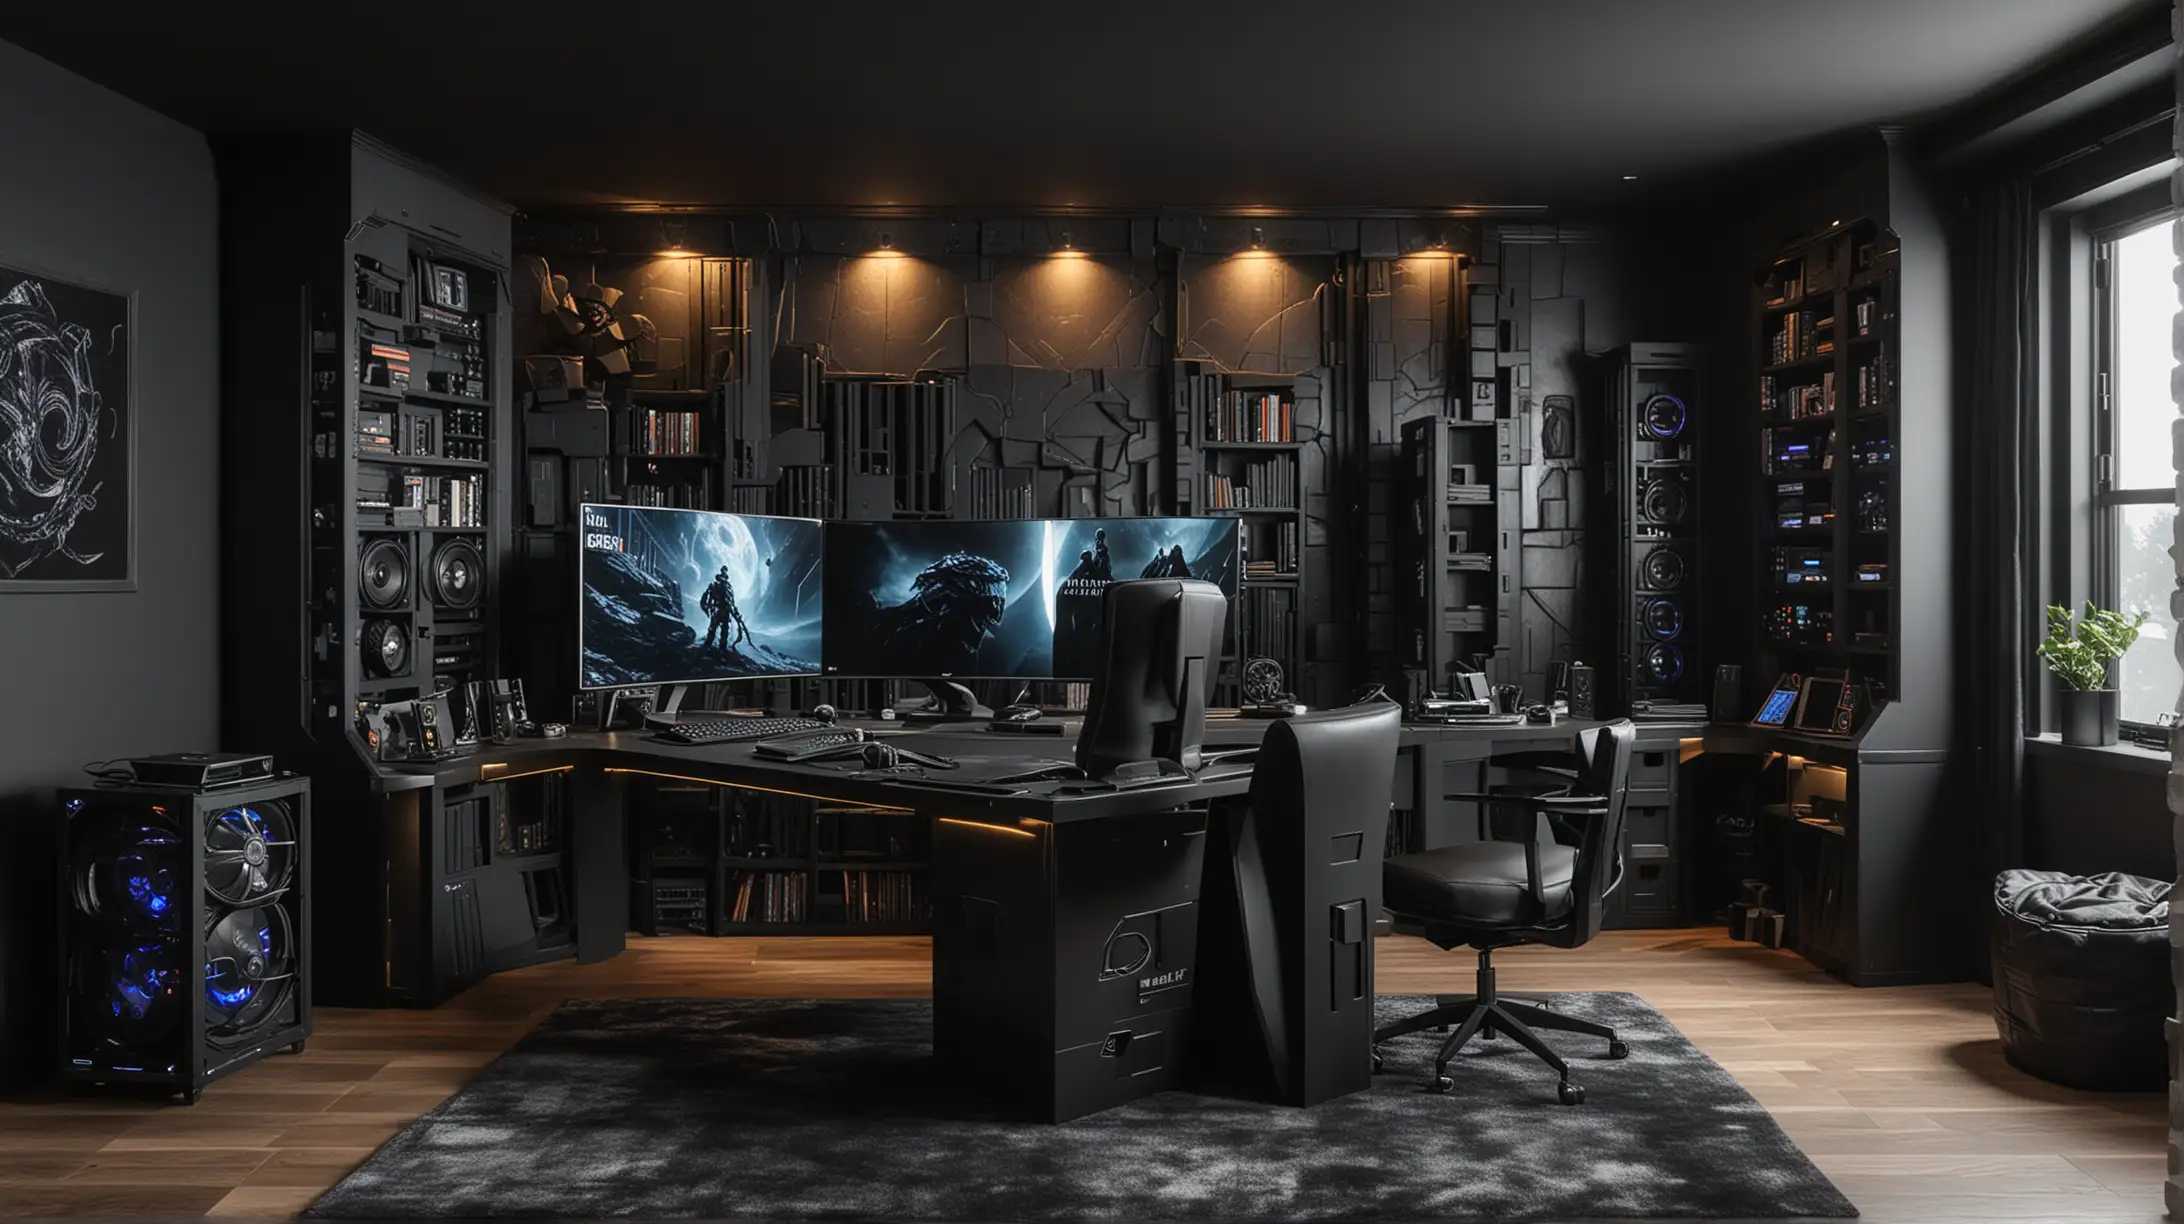 Sophisticated obsidian Fortress-inspired computer gaming setup room